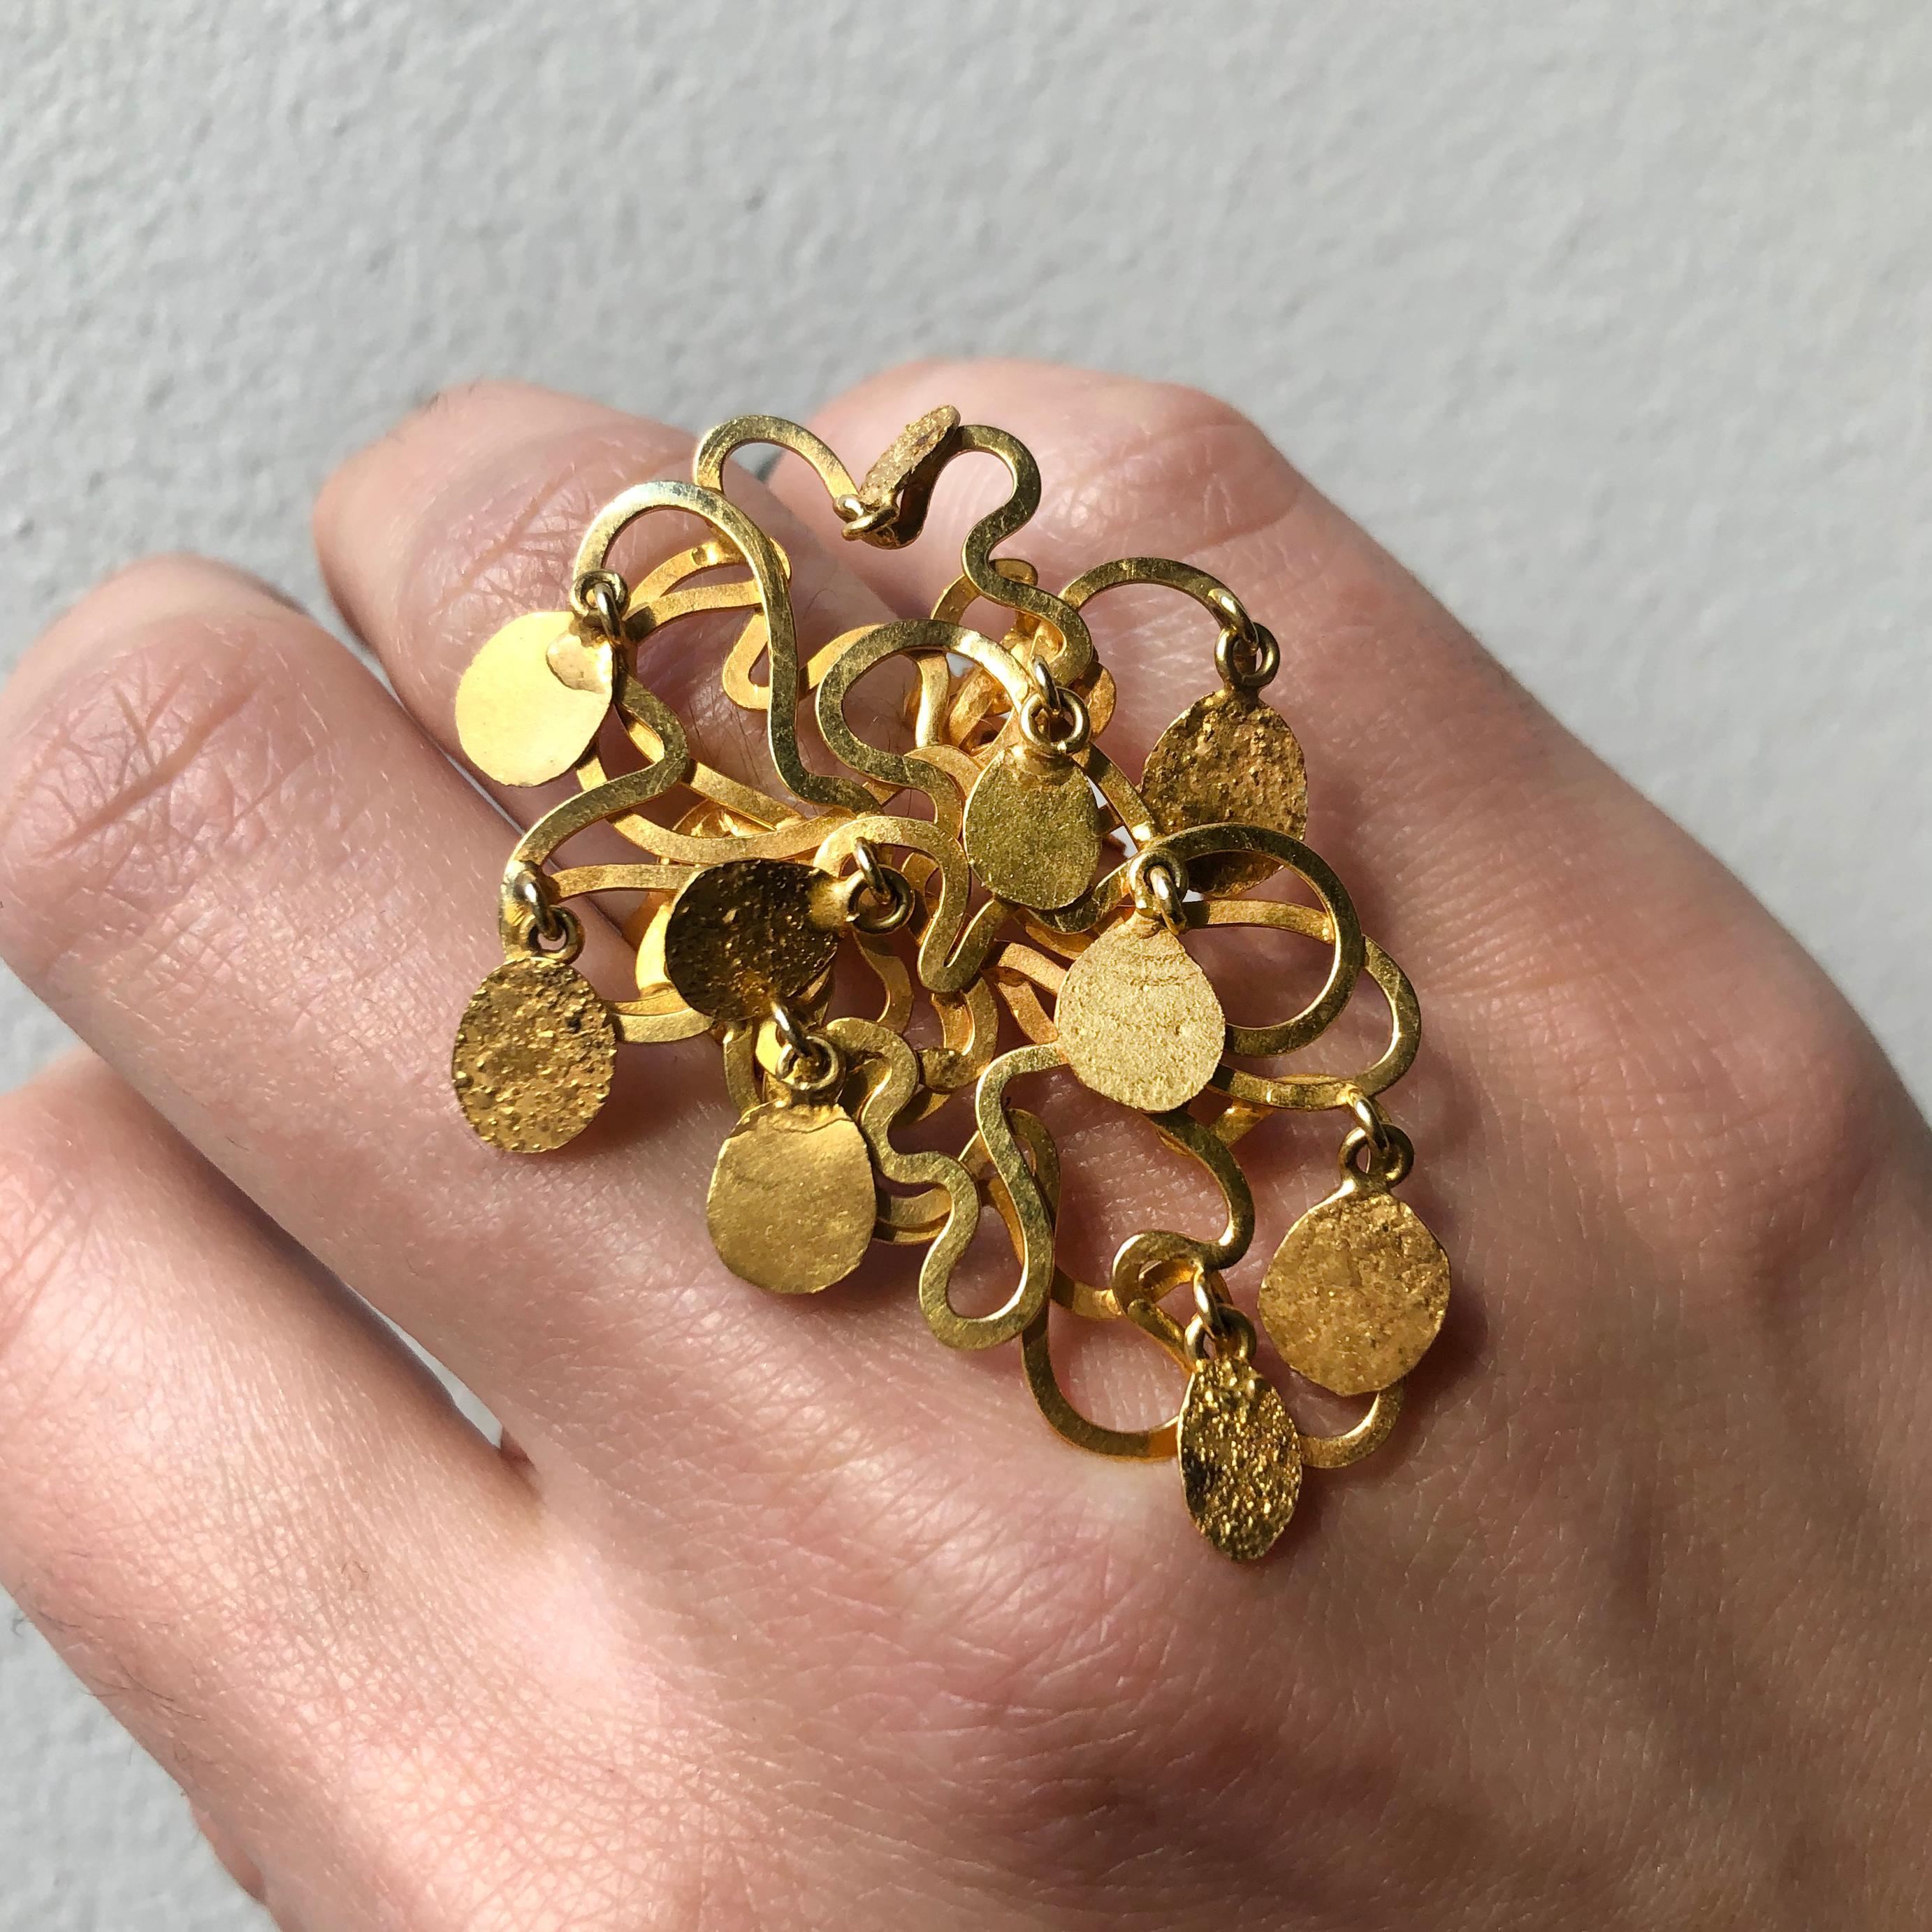 A gold ring with articulated ornaments, by sculptor E.R. Nele, c. 1990. Ring size 7. E. R. Nele (b. 1932) is a German artist known primarily for large-scale metal sculptures. She studied in Berlin and at the Central School of Arts and Crafts,